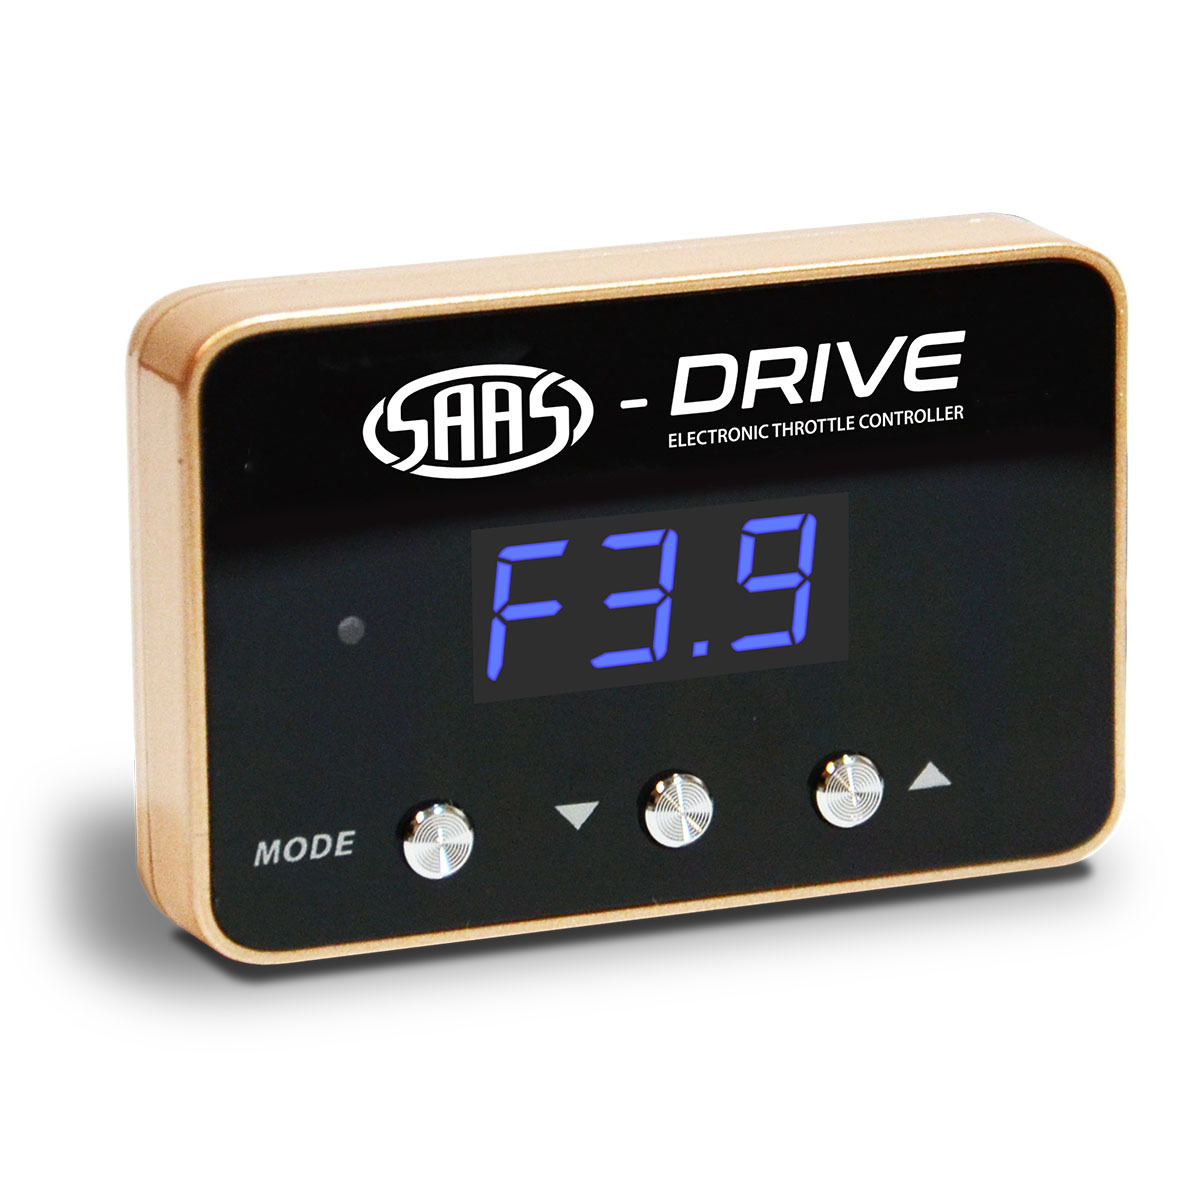 SAAS-Drive Cadillac CTS 2014 - 2019 Throttle Controller 